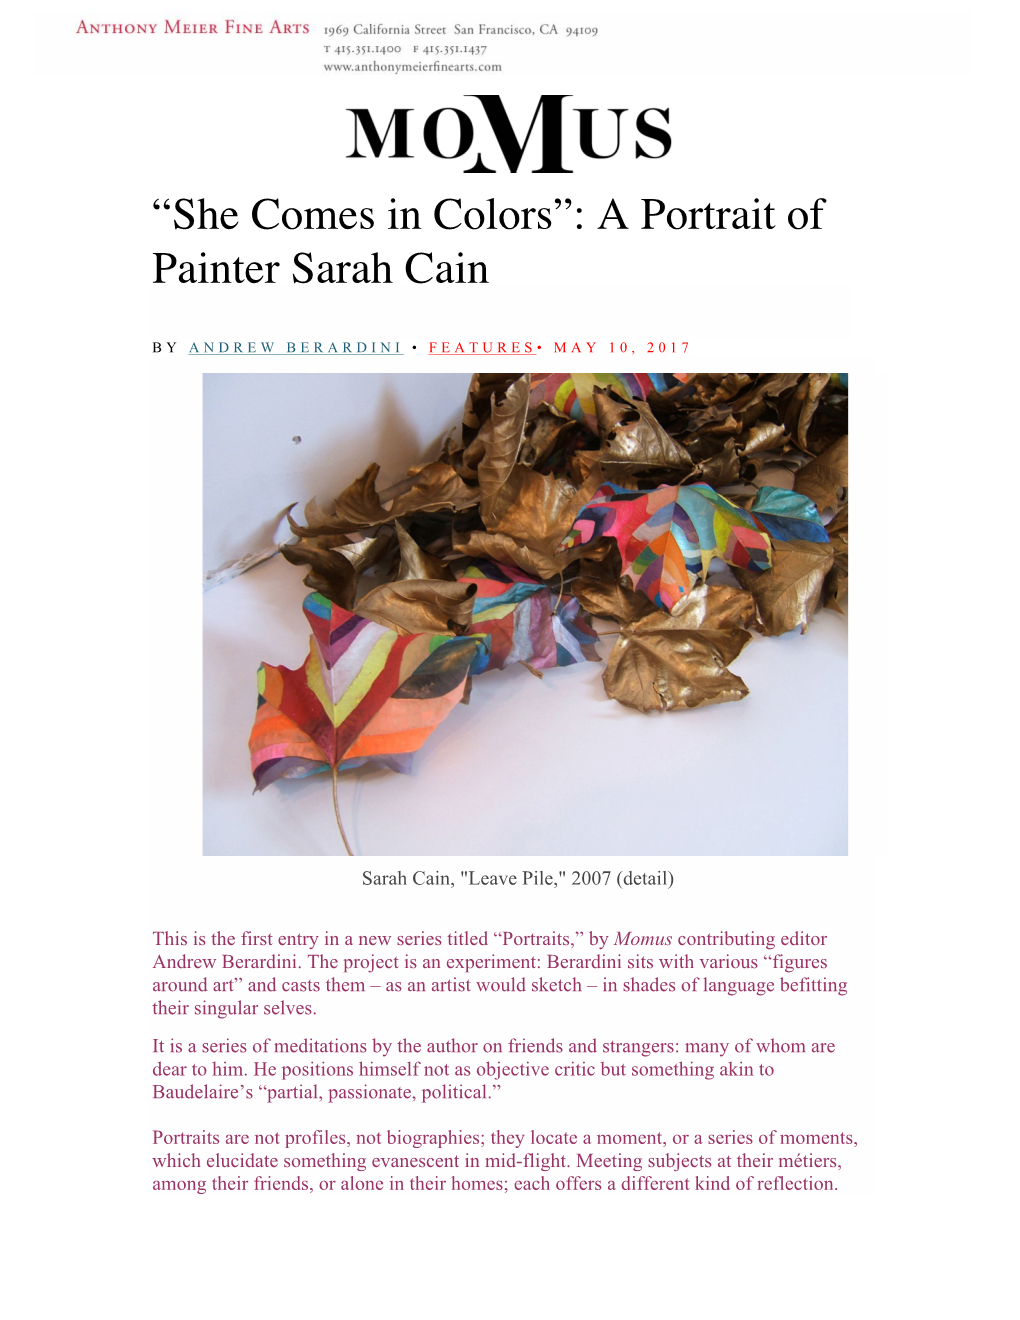 “She Comes in Colors”: a Portrait of Painter Sarah Cain